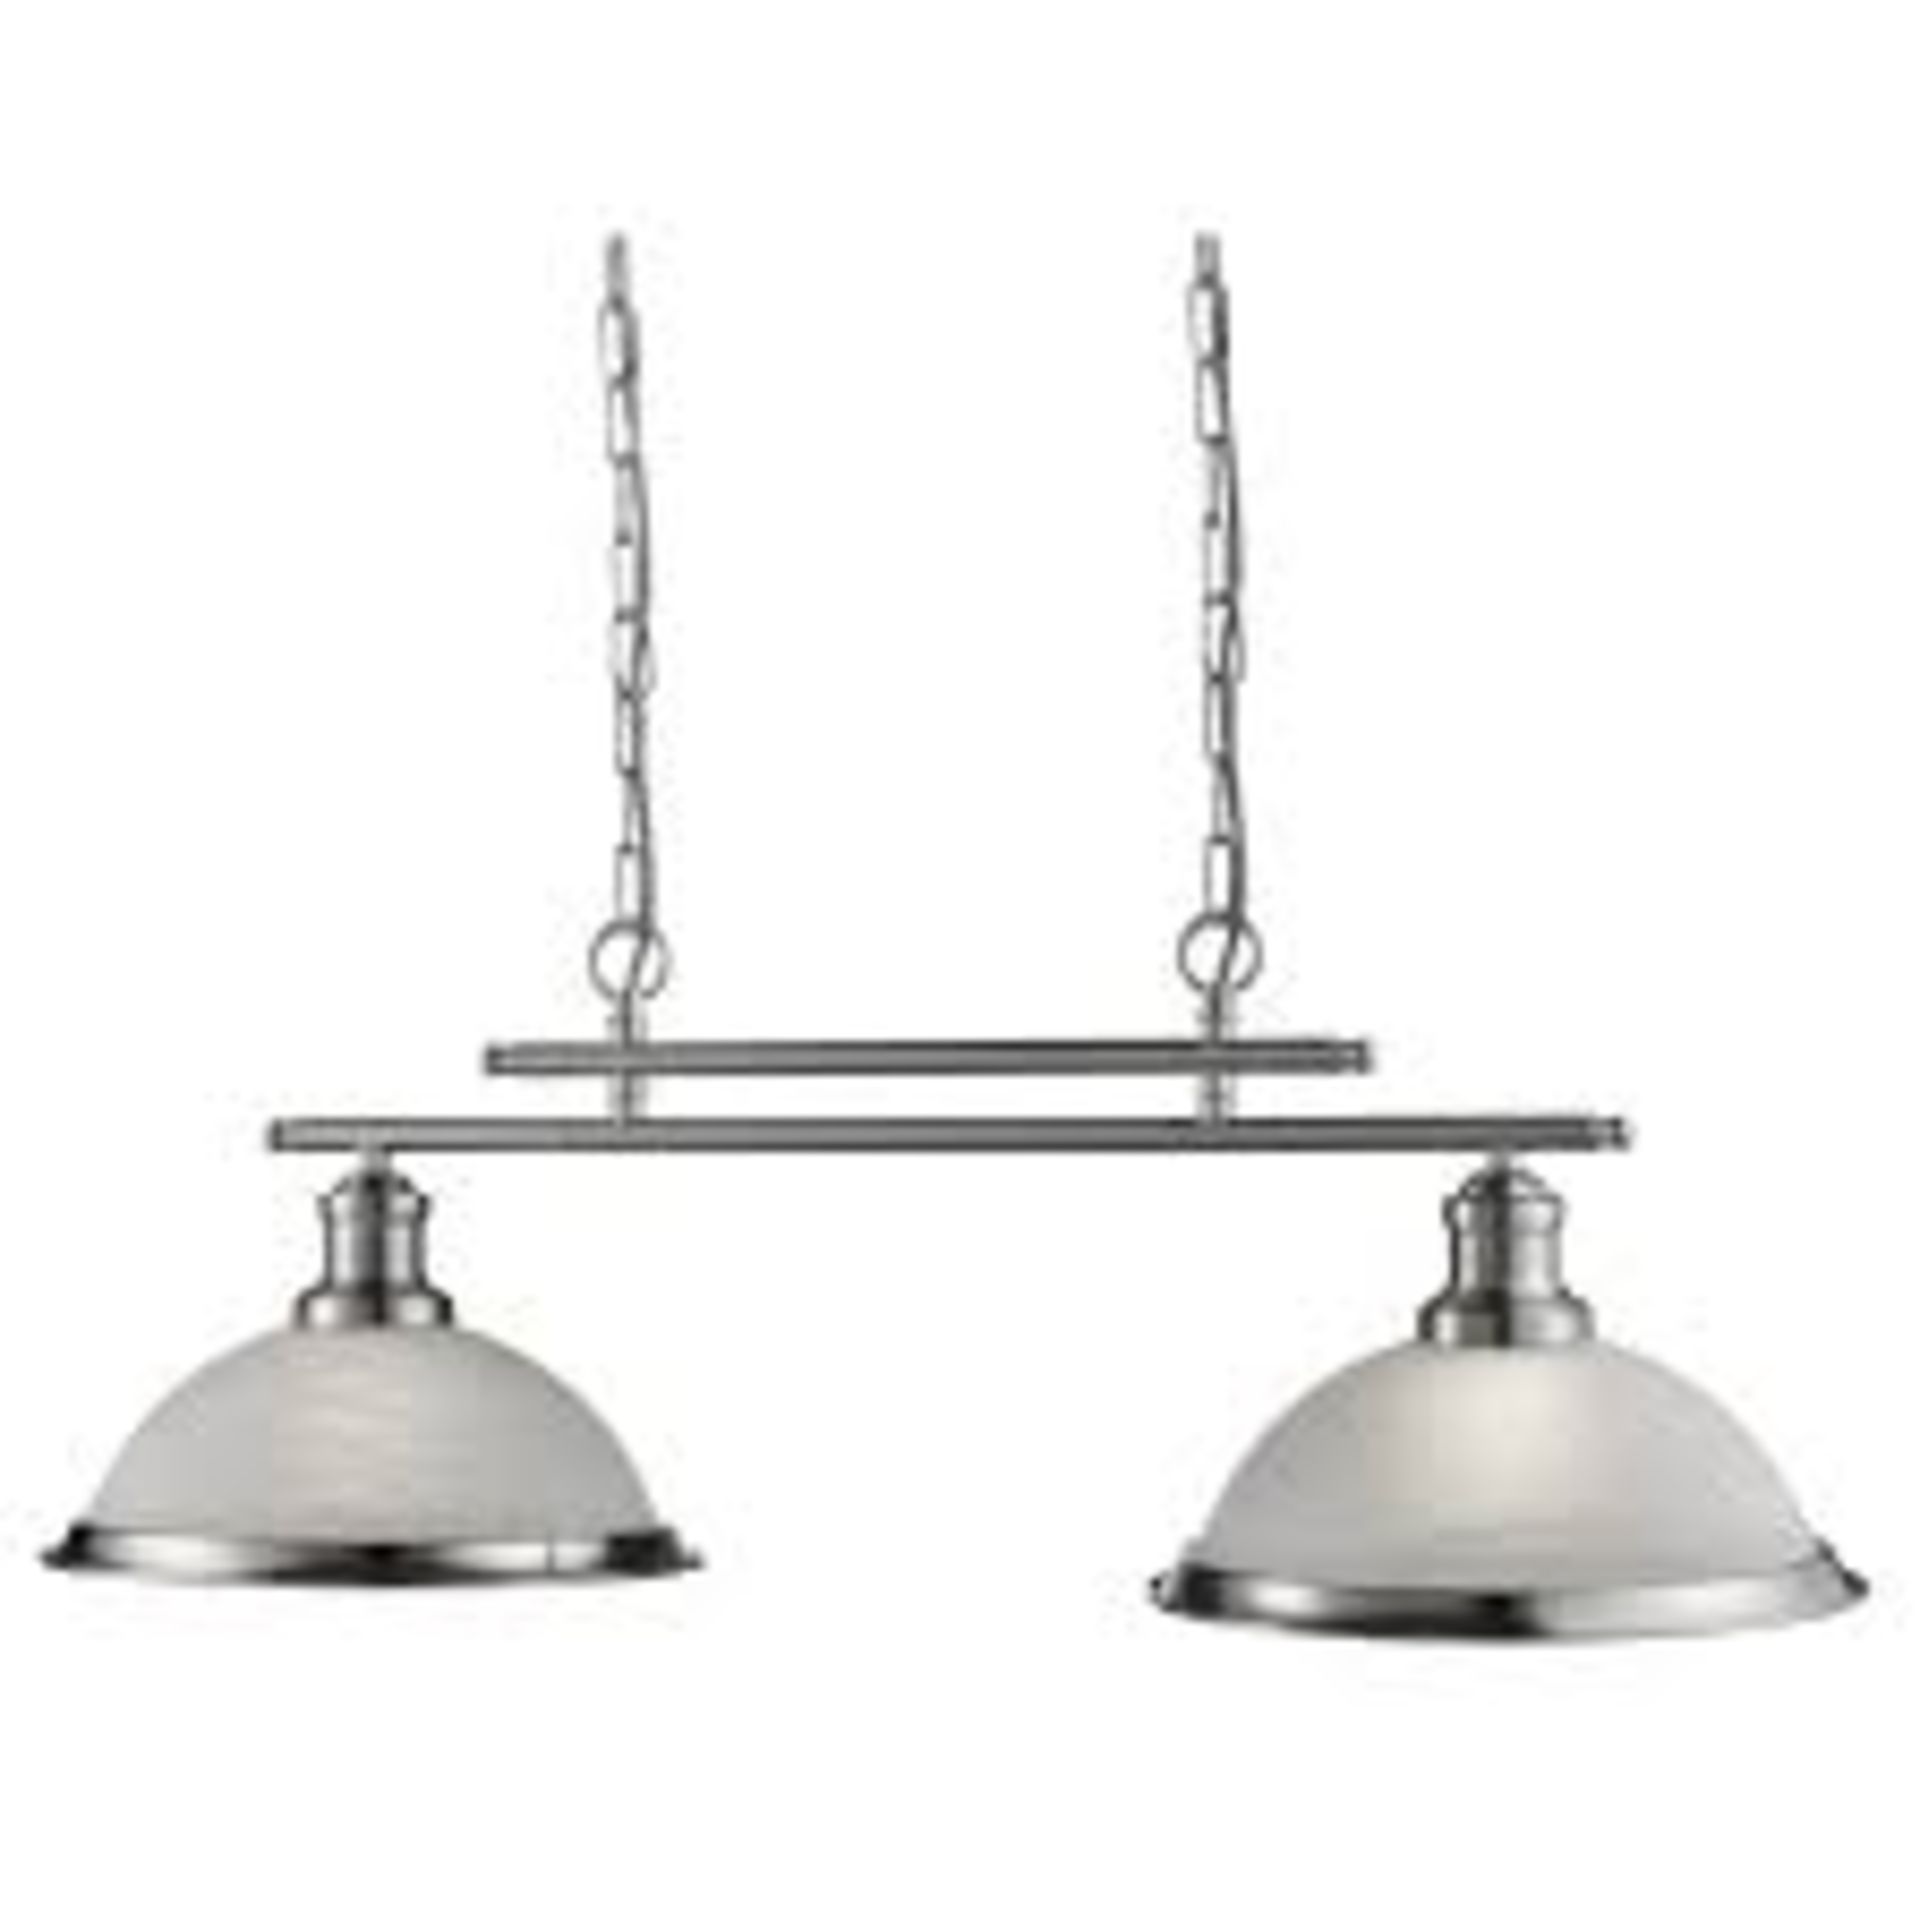 1 x Searchlight bistro 2 Light Ceiling Bar in satin silver - Ref: 2682-2SS - New Boxed - RRP: £115 - Image 2 of 3